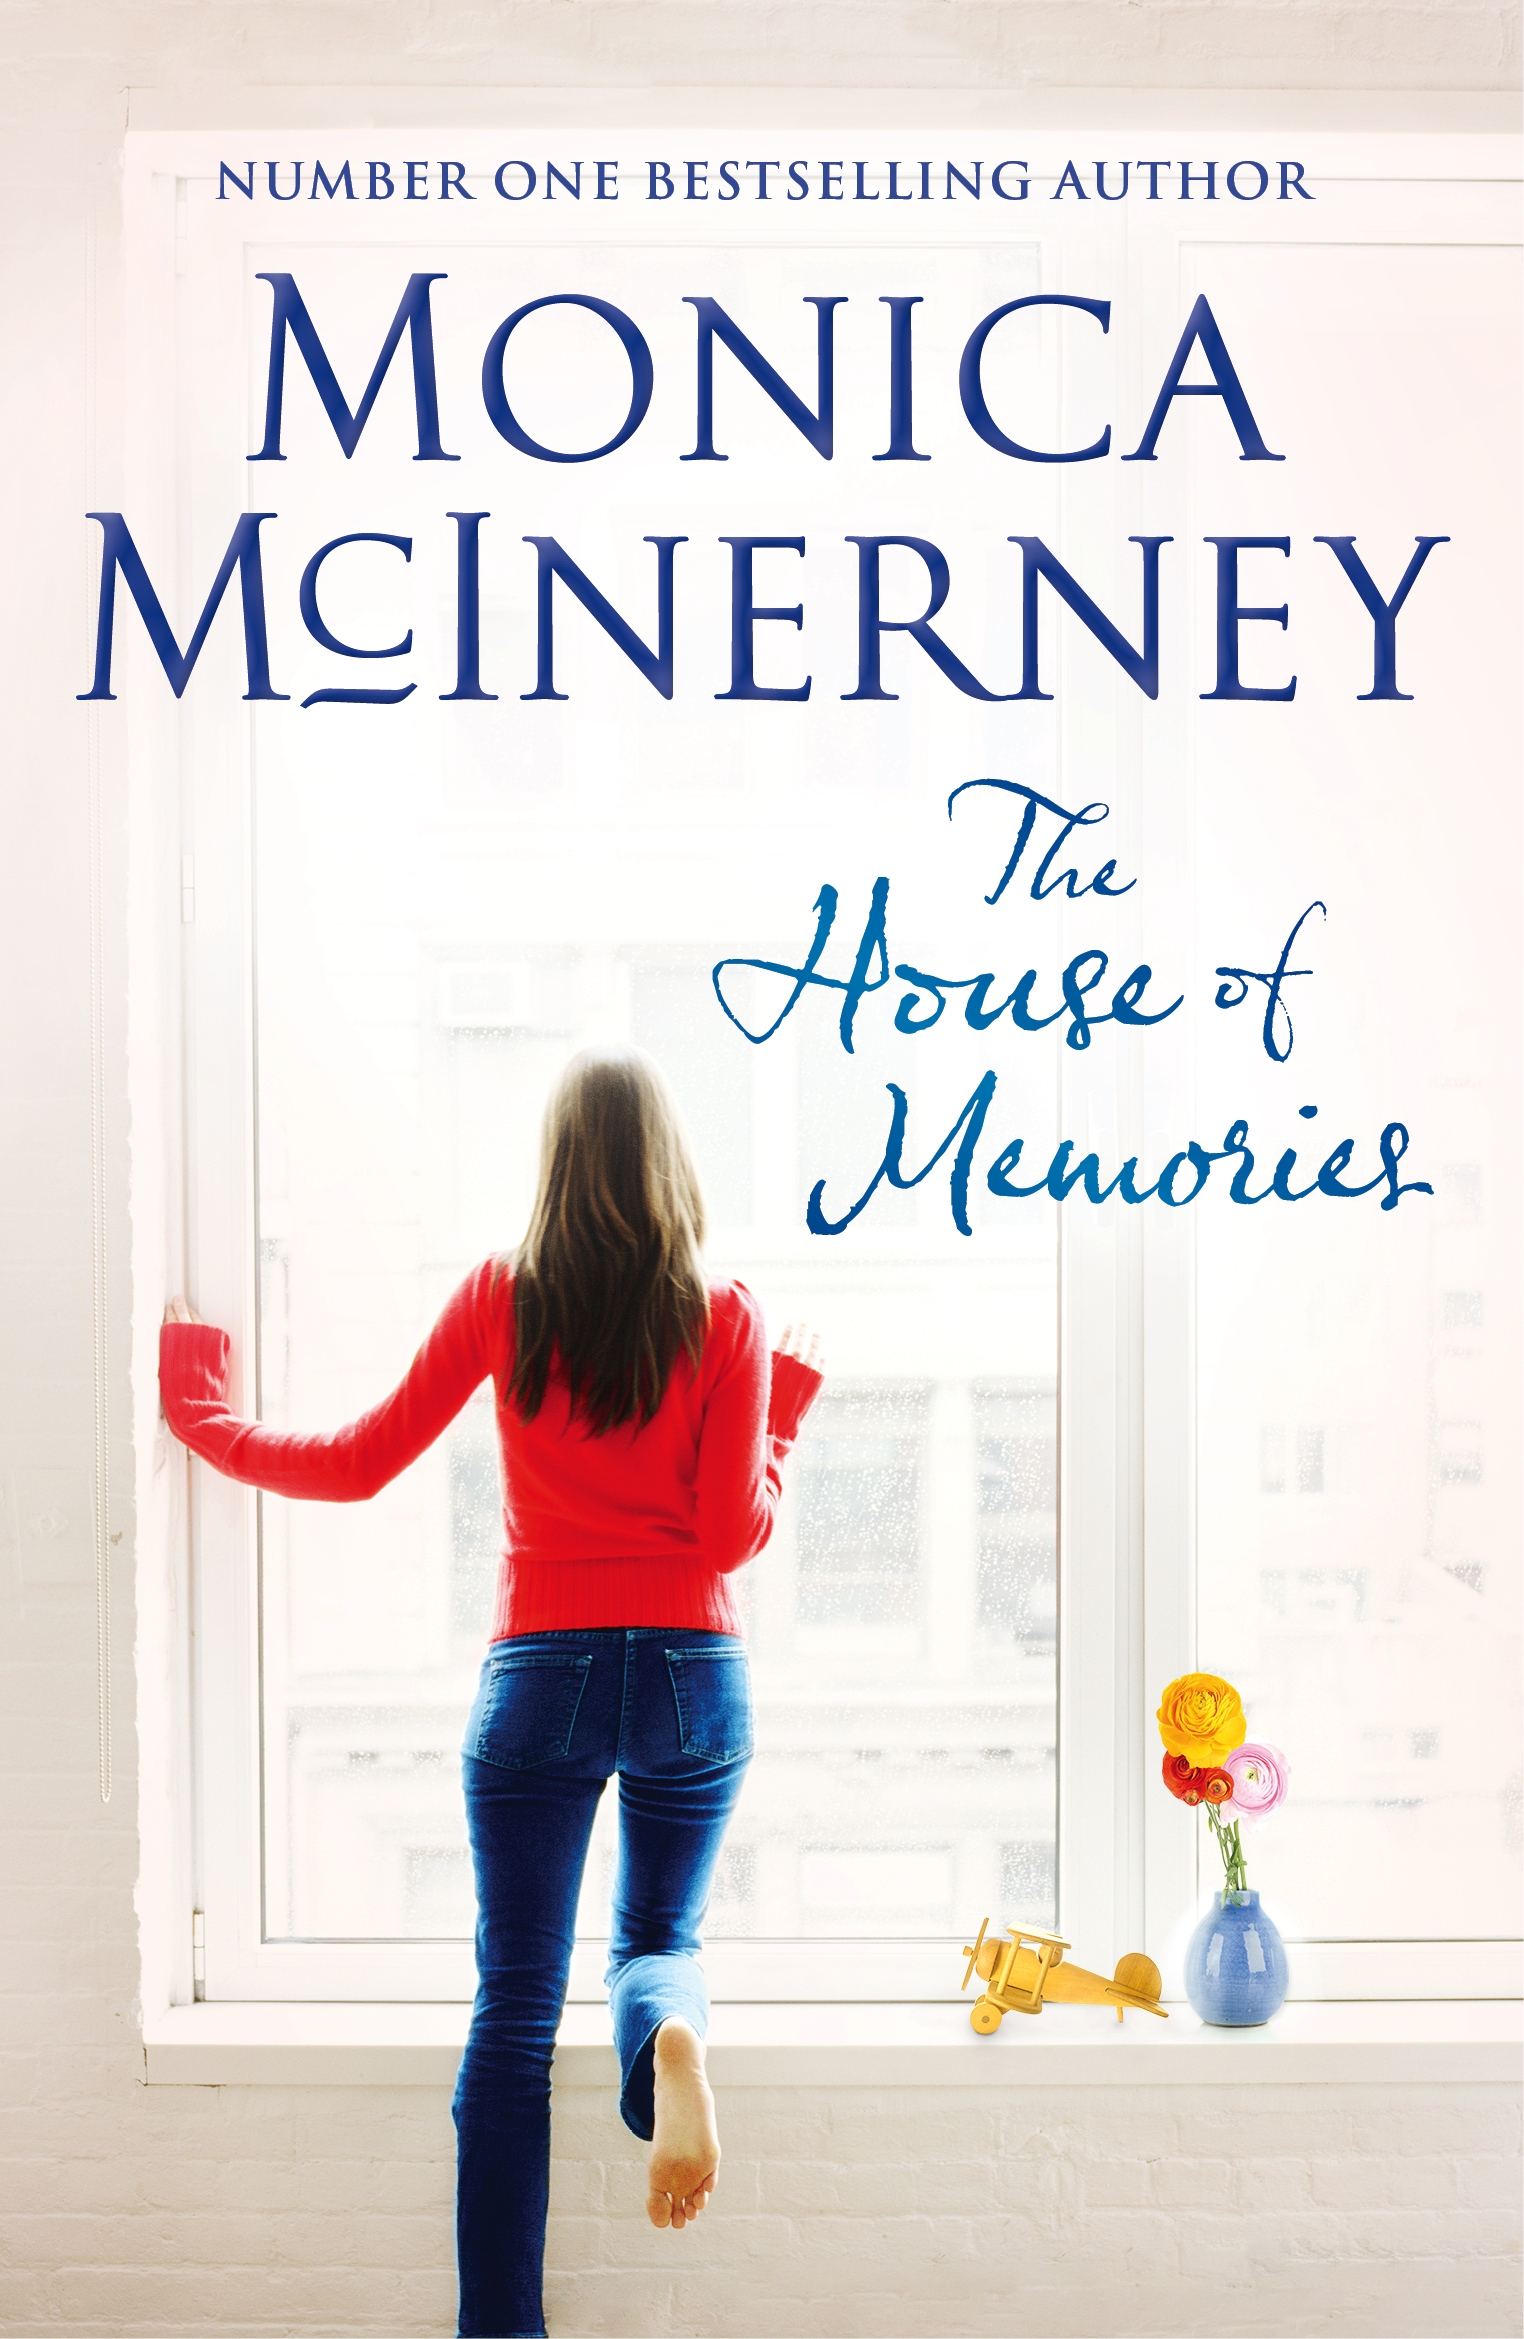 the trip of a lifetime monica mcinerney review